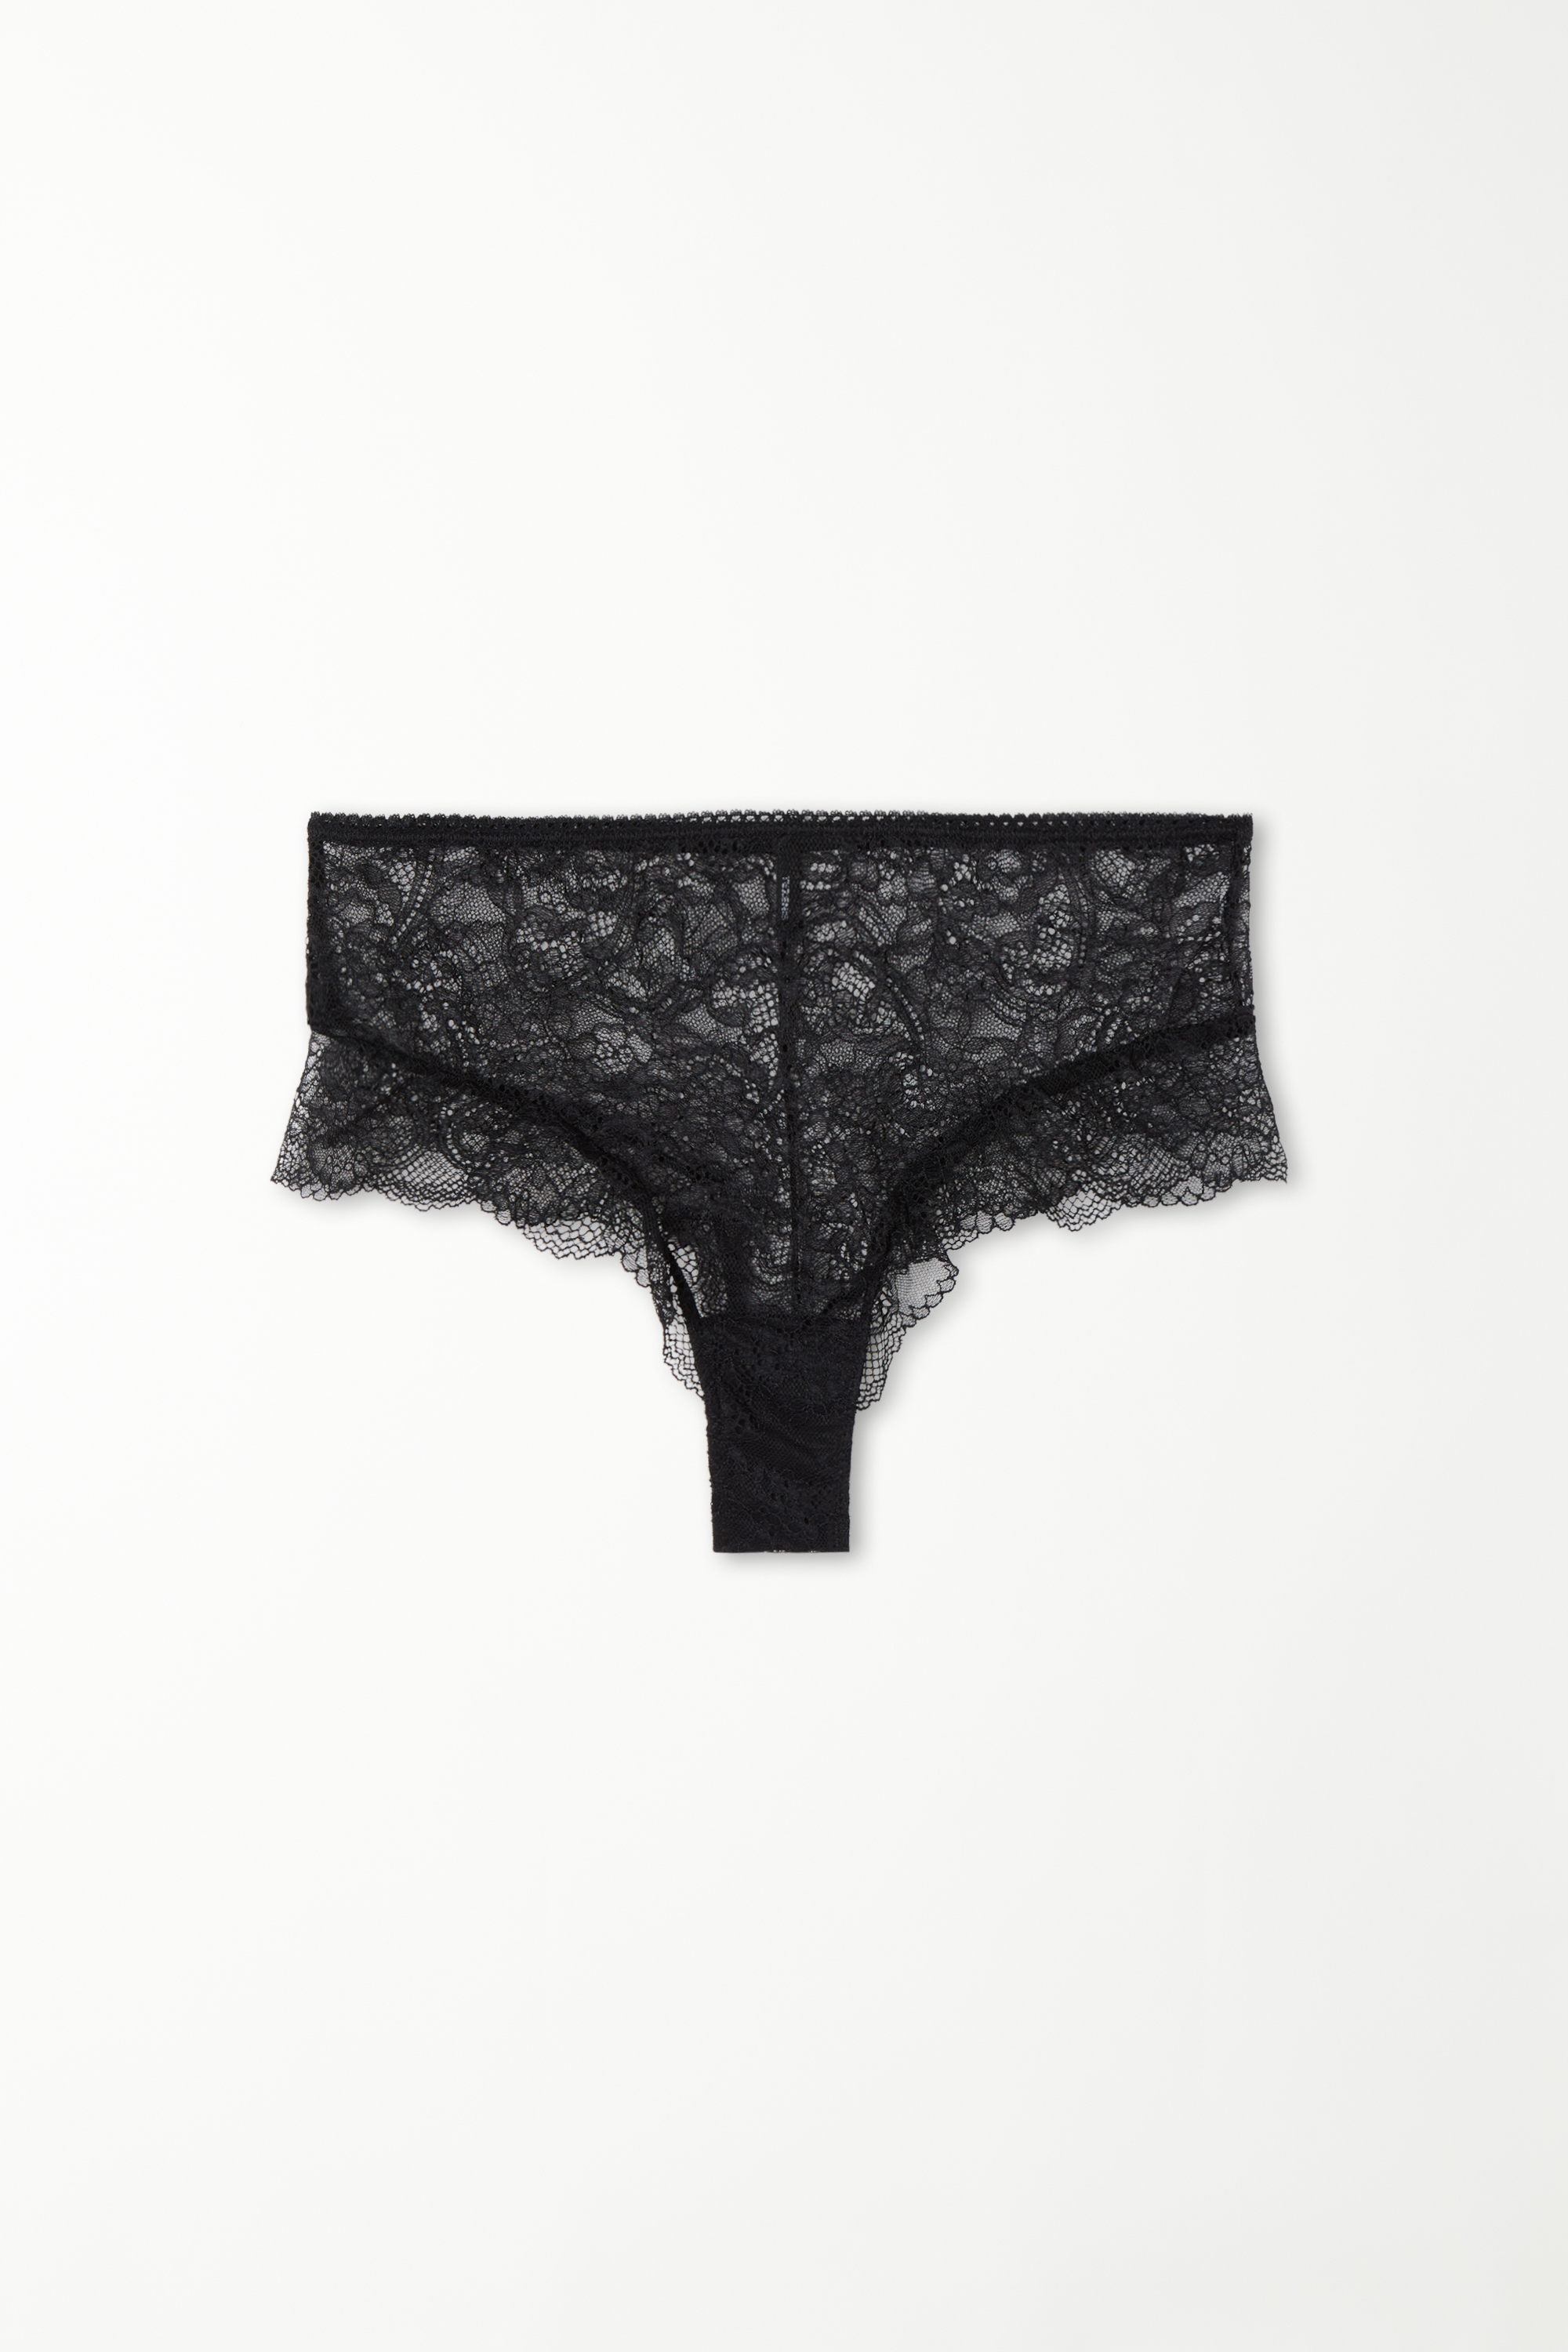 Timeless Lace High-Waist French Knickers